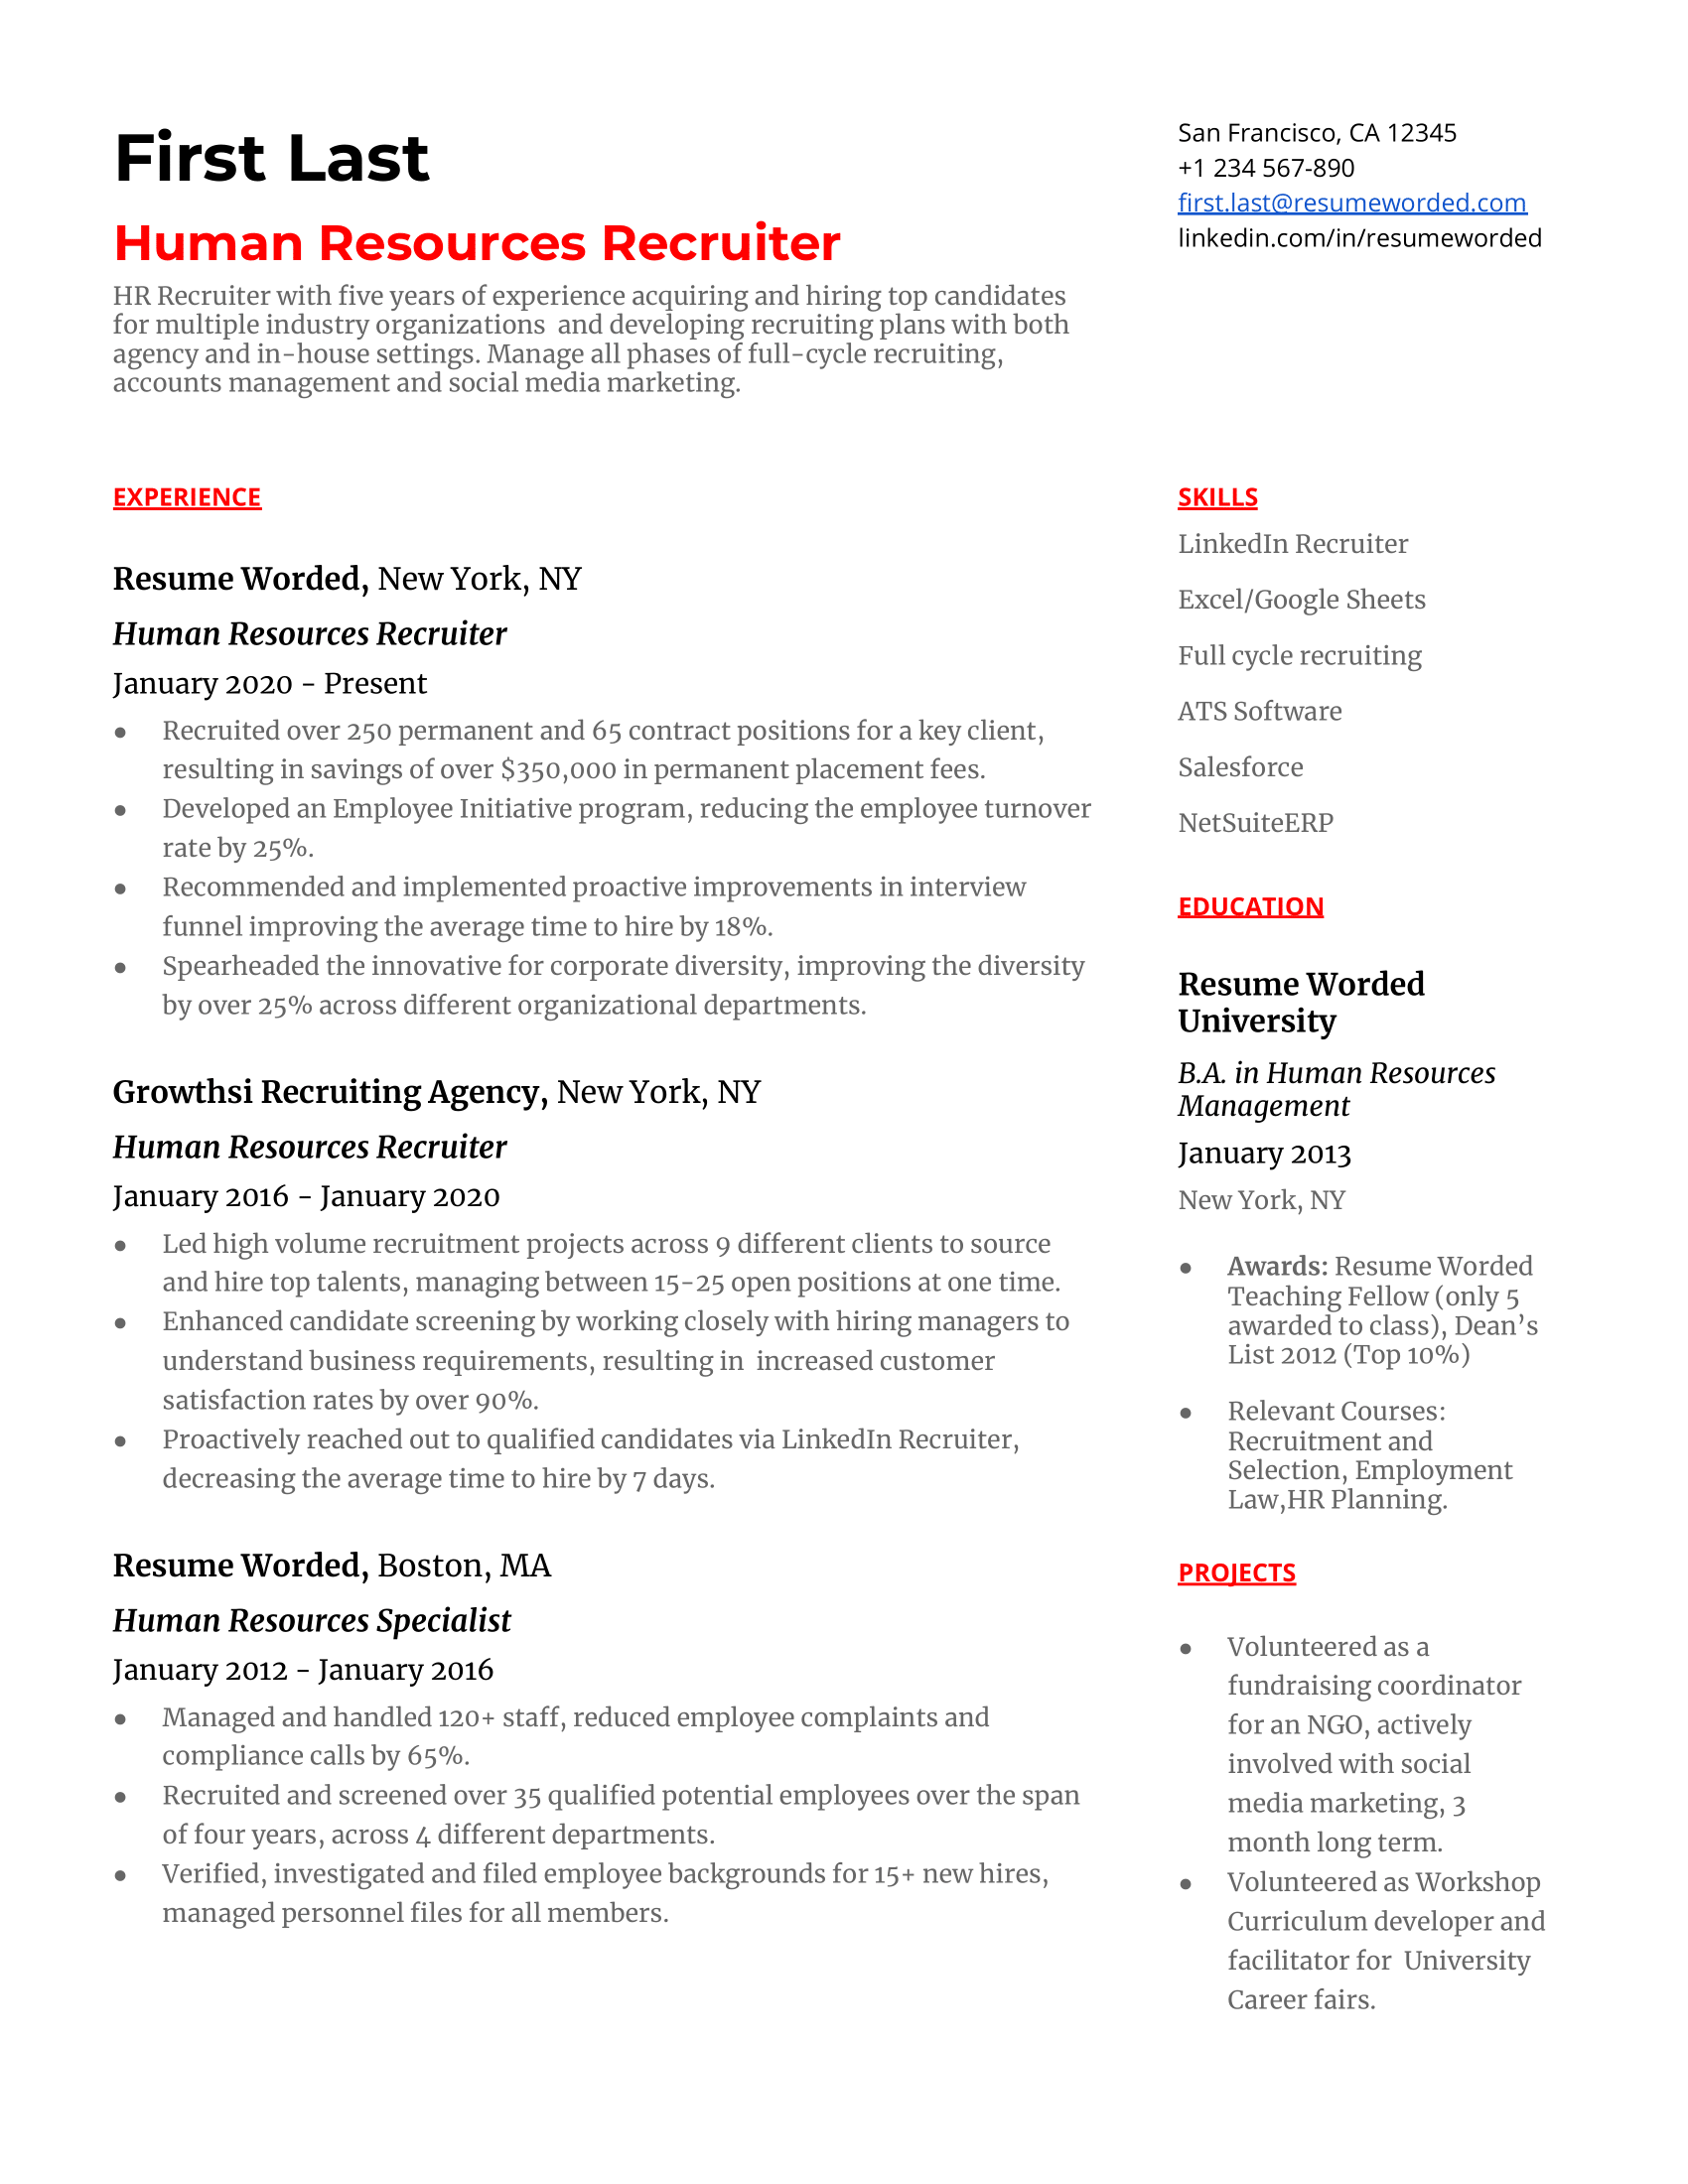 Human resources recruiter resume with hard skills and relevant work experience
